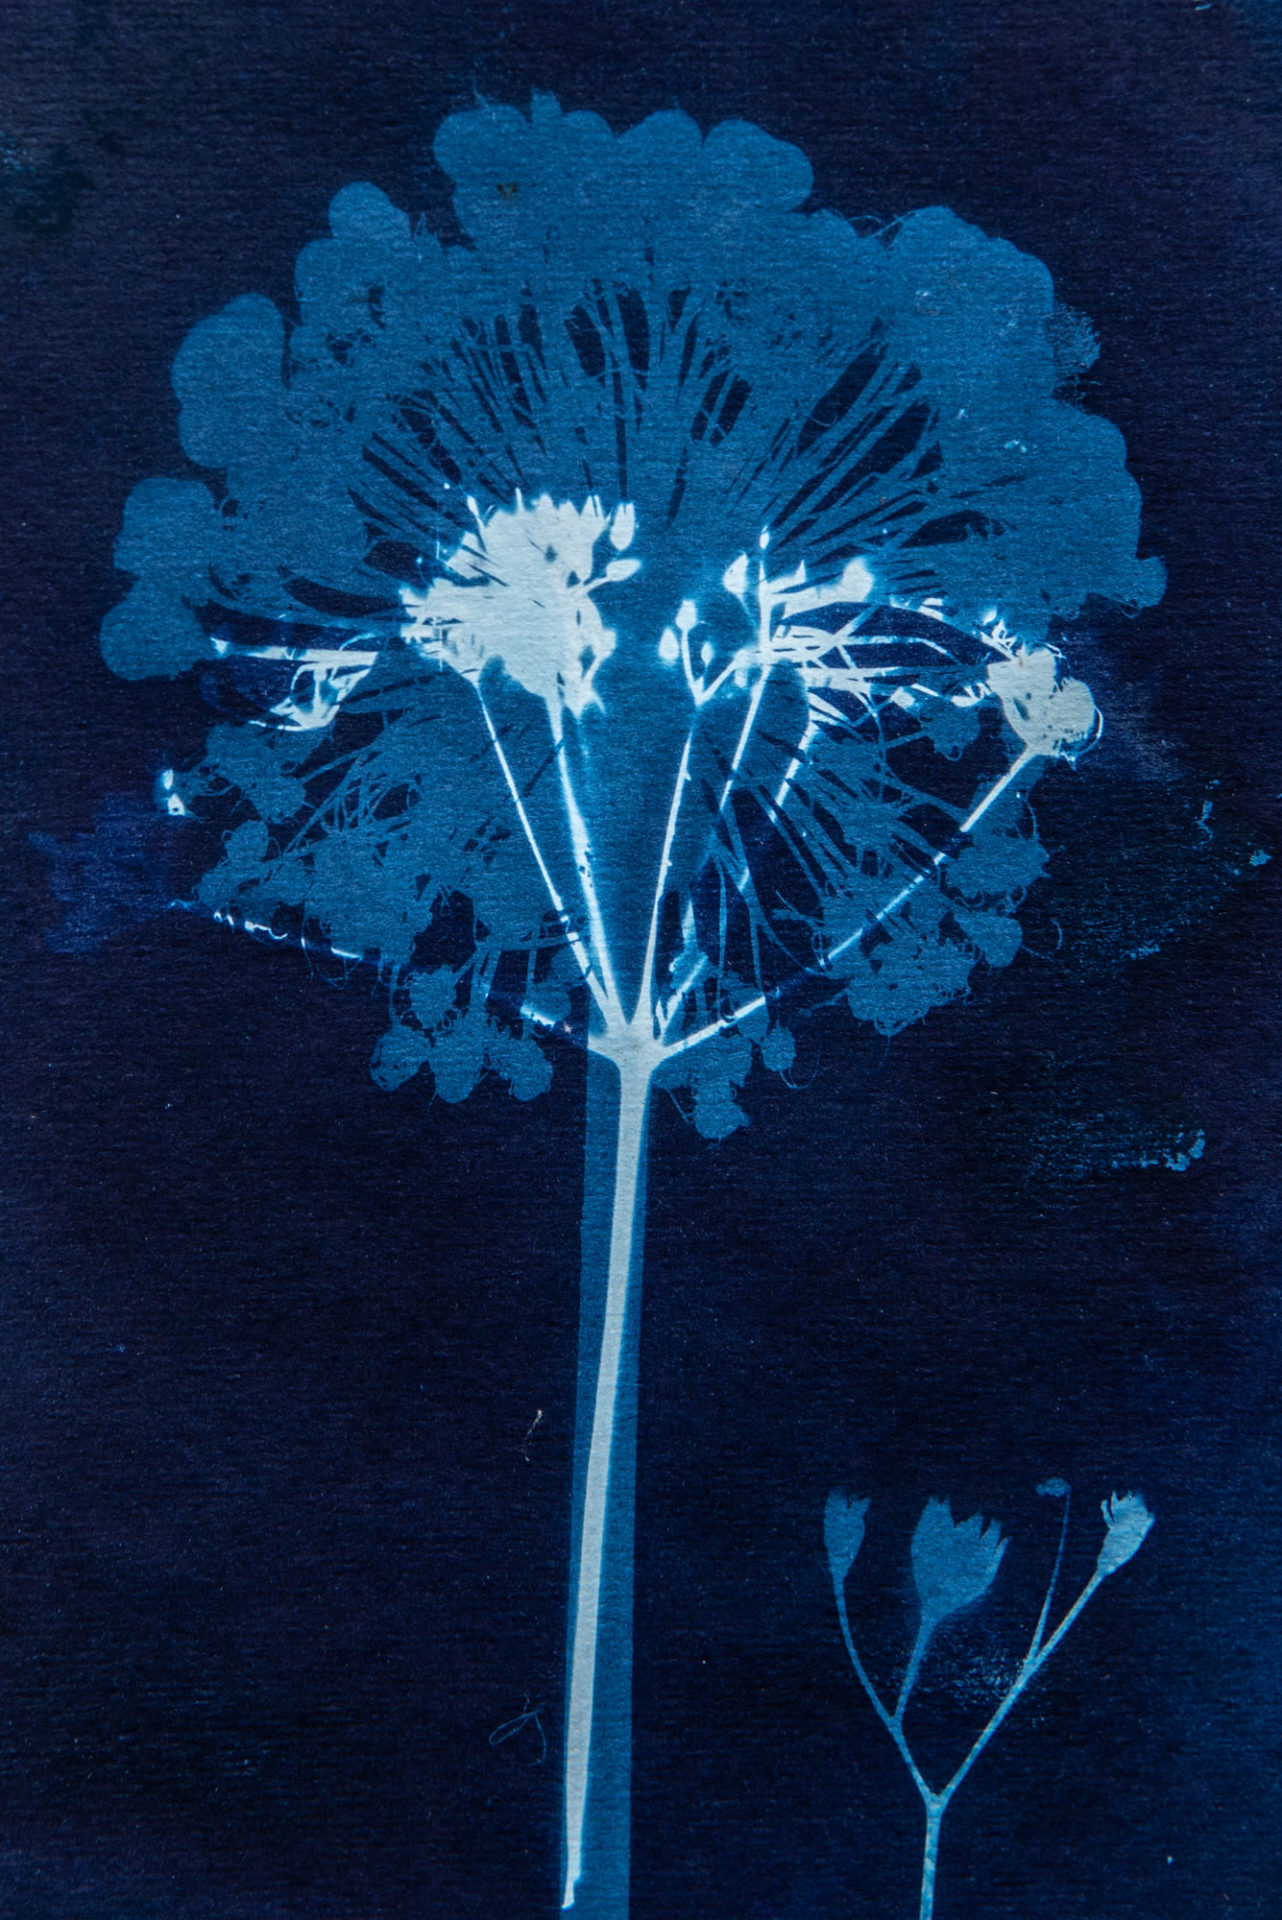 Cyanotype art for sale Oxford original art and limited edition prints Oxford artist